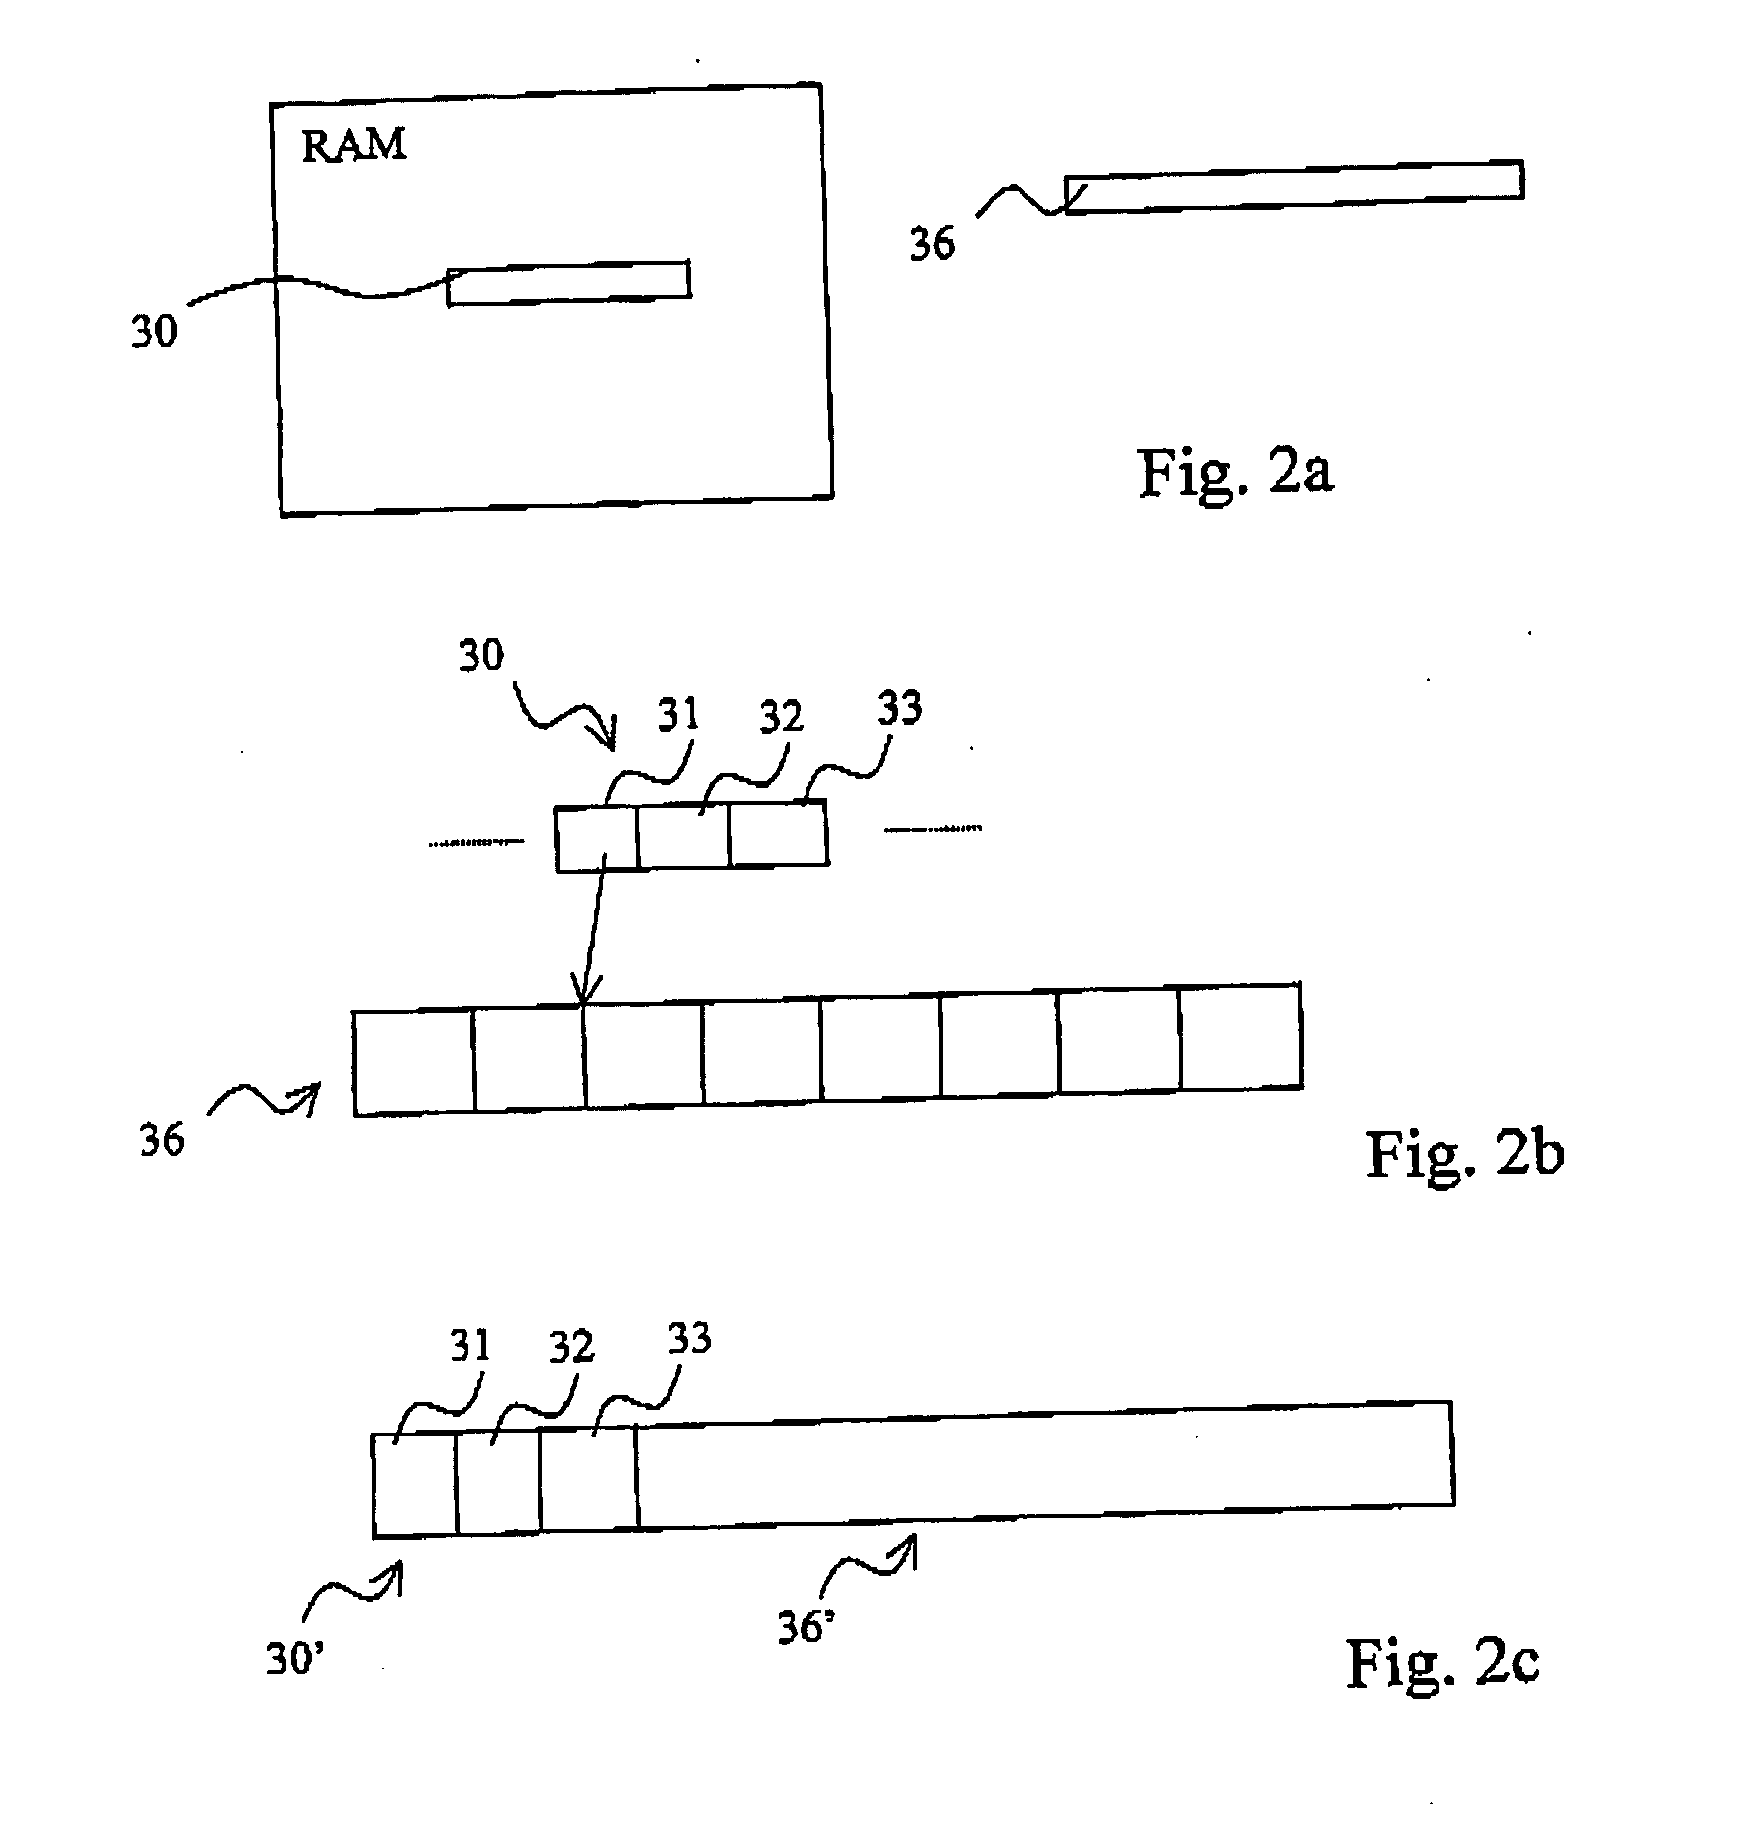 Method for processing a digital image and image representation format